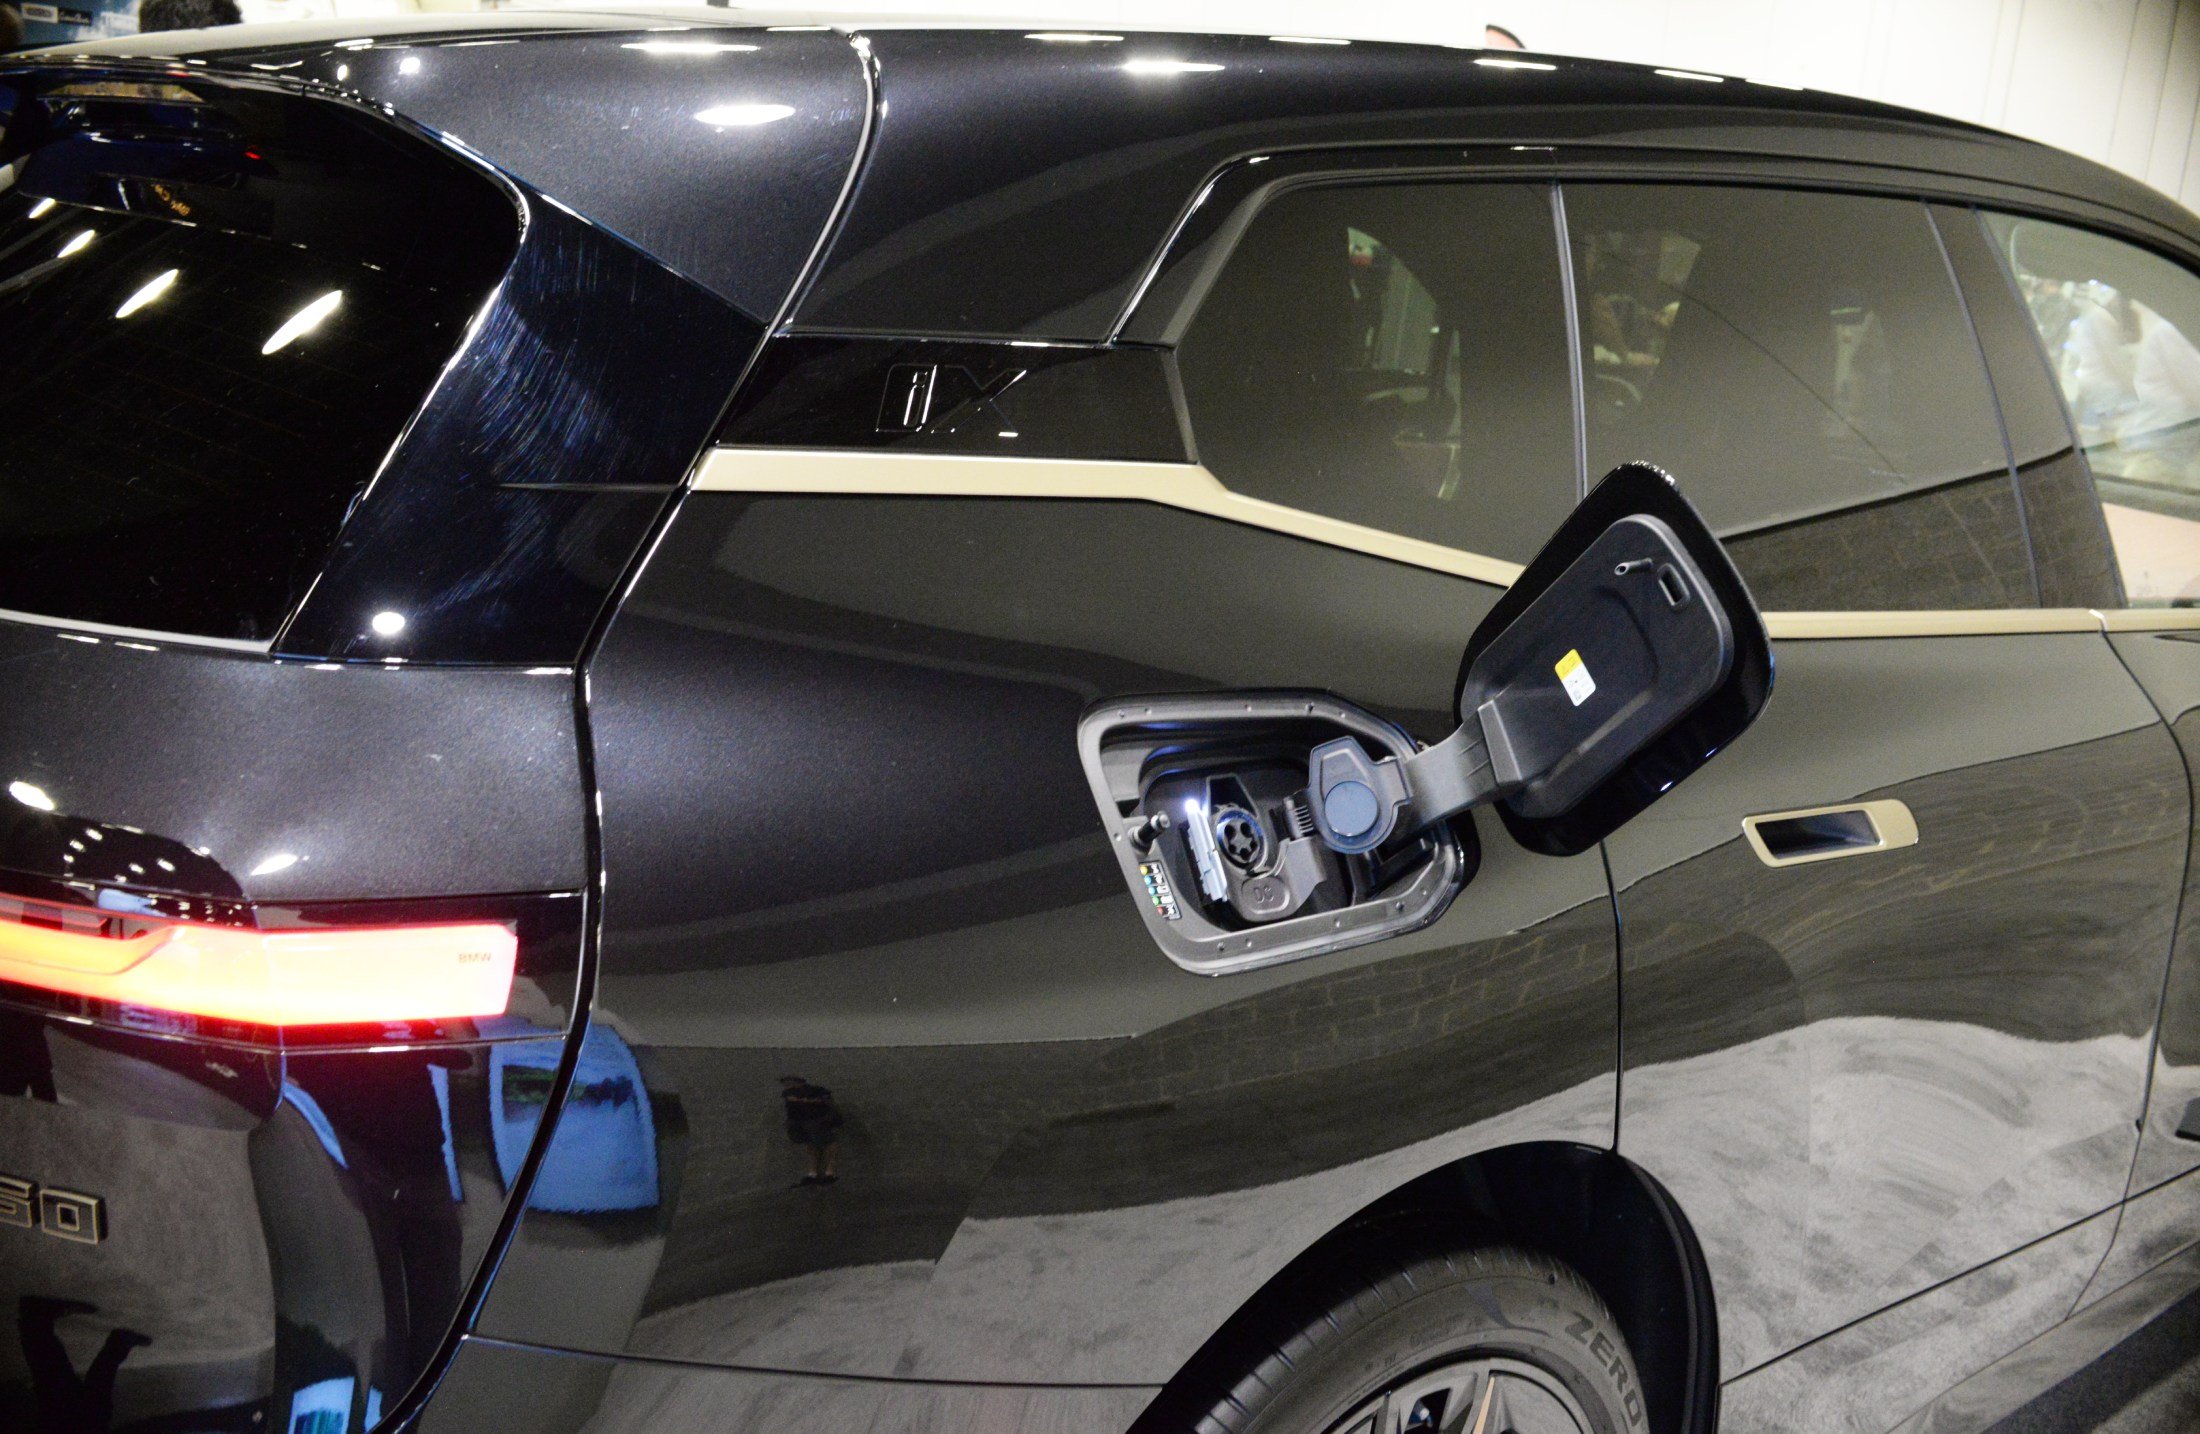 Home EV chargers for the BMW iX